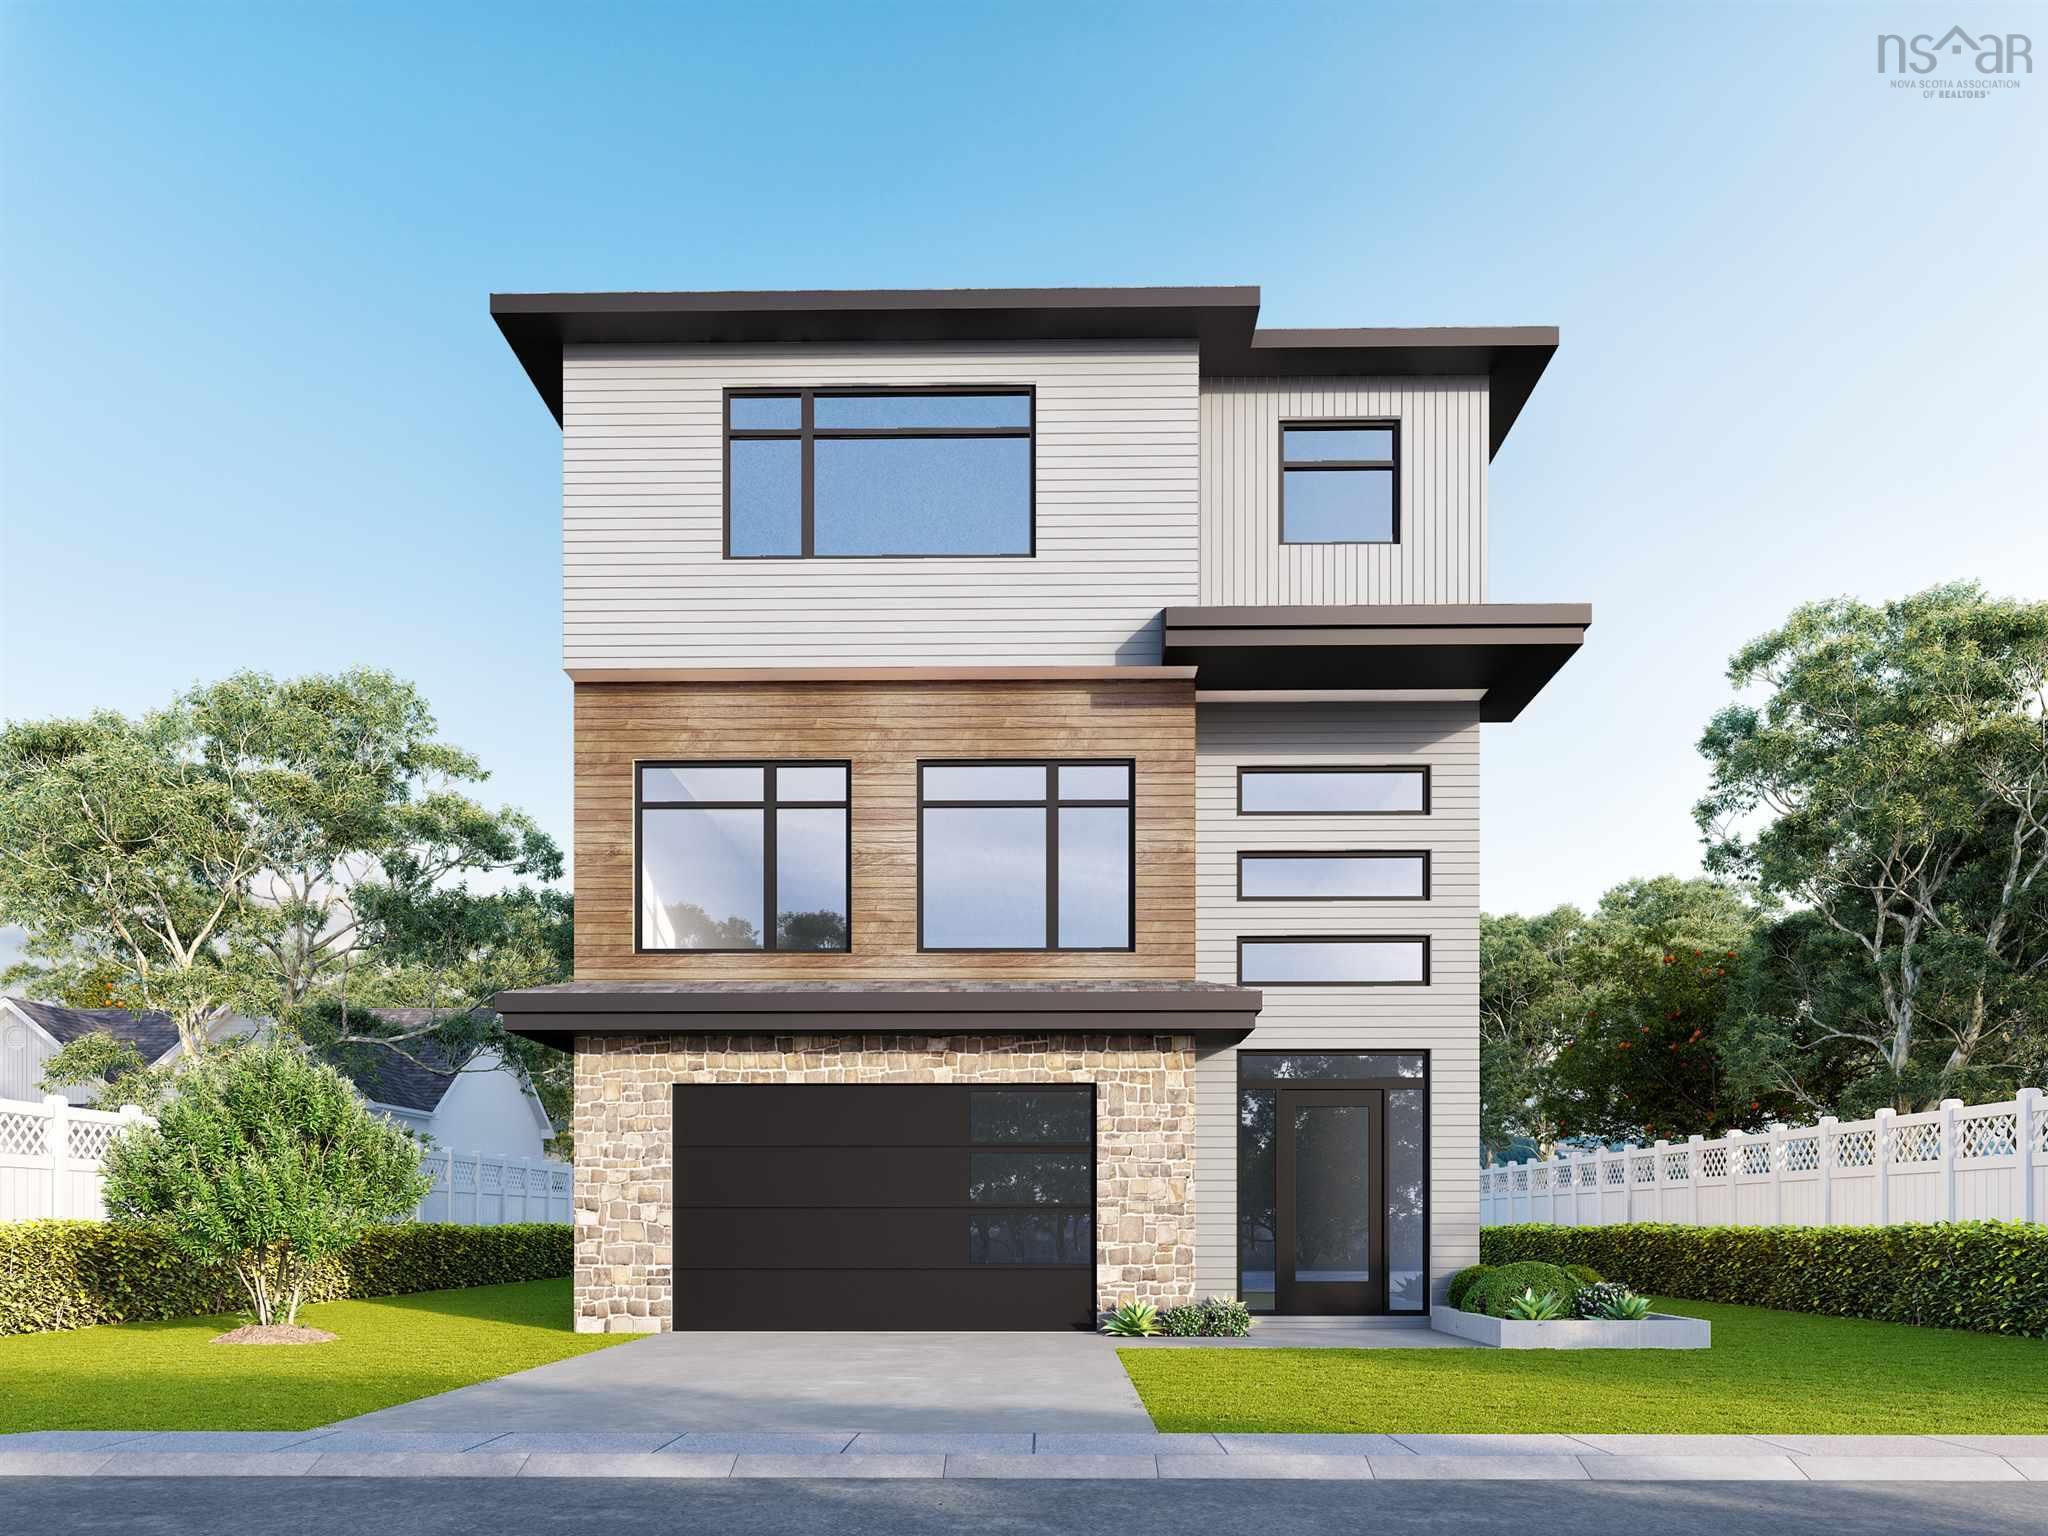 Main Photo: Lot 71 Marketway Lane in Timberlea: 40-Timberlea, Prospect, St. Marg Residential for sale (Halifax-Dartmouth)  : MLS®# 202200213